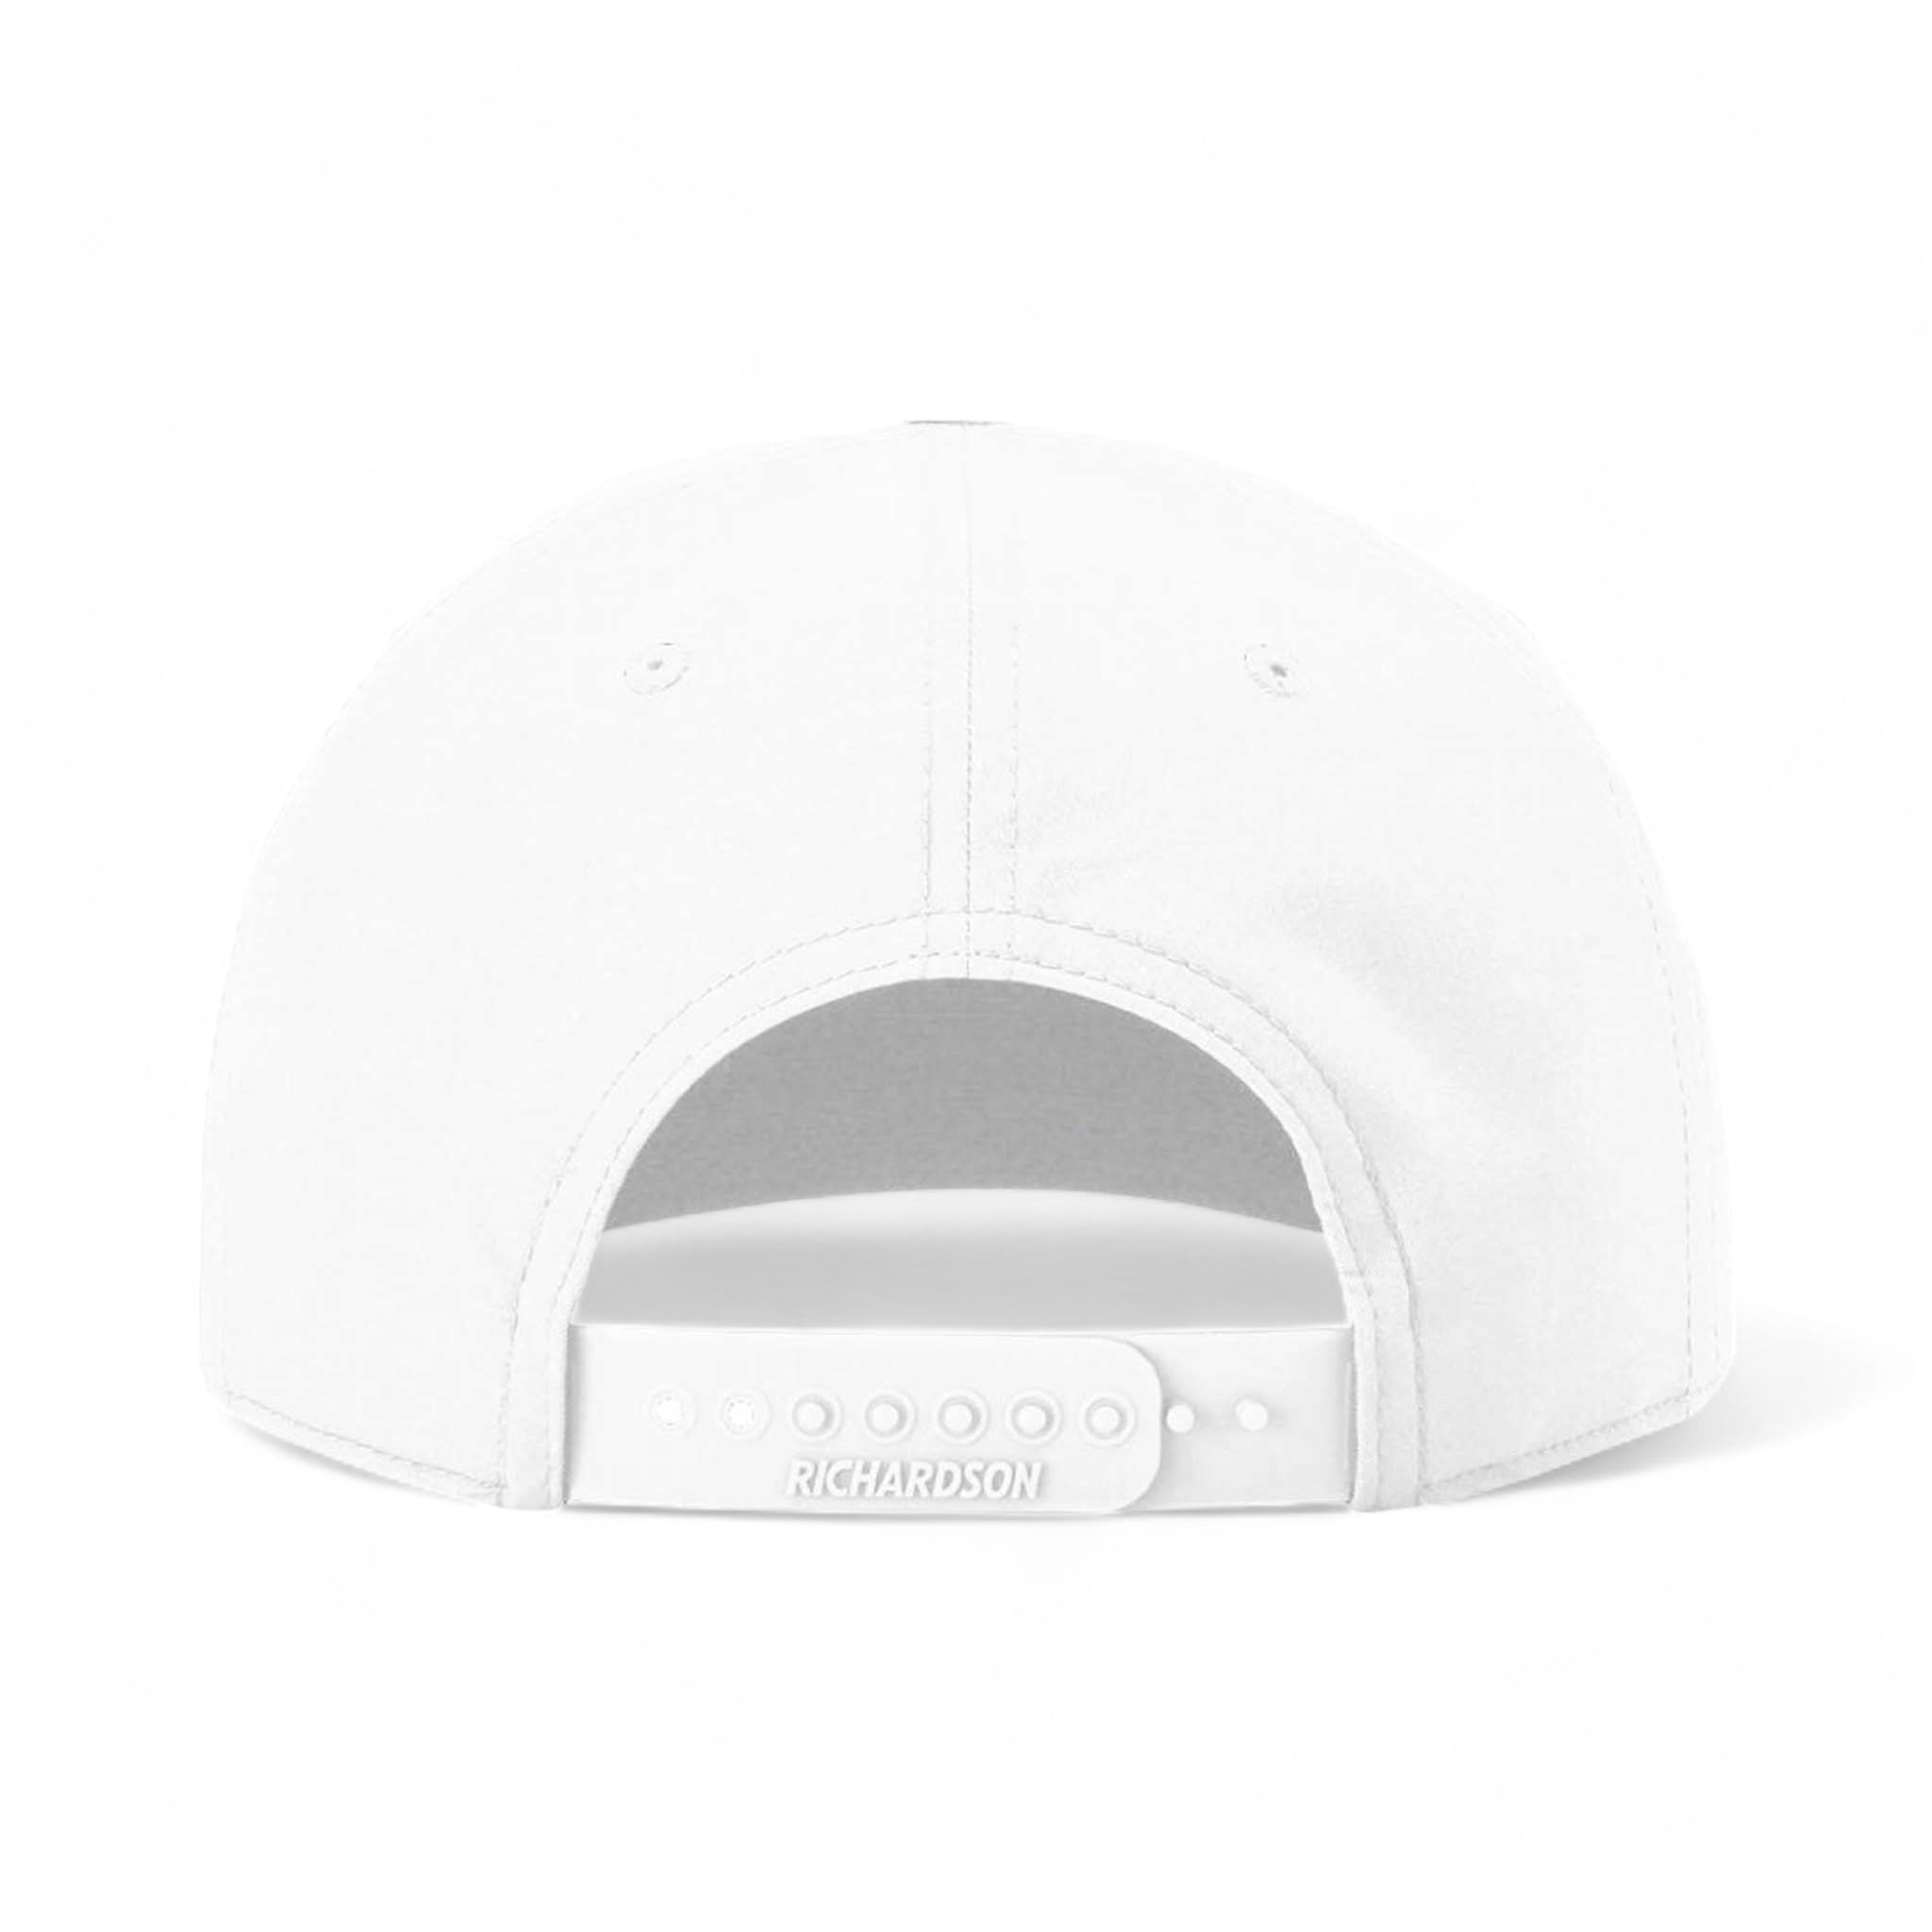 Back view of Richardson 258 custom hat in white and black